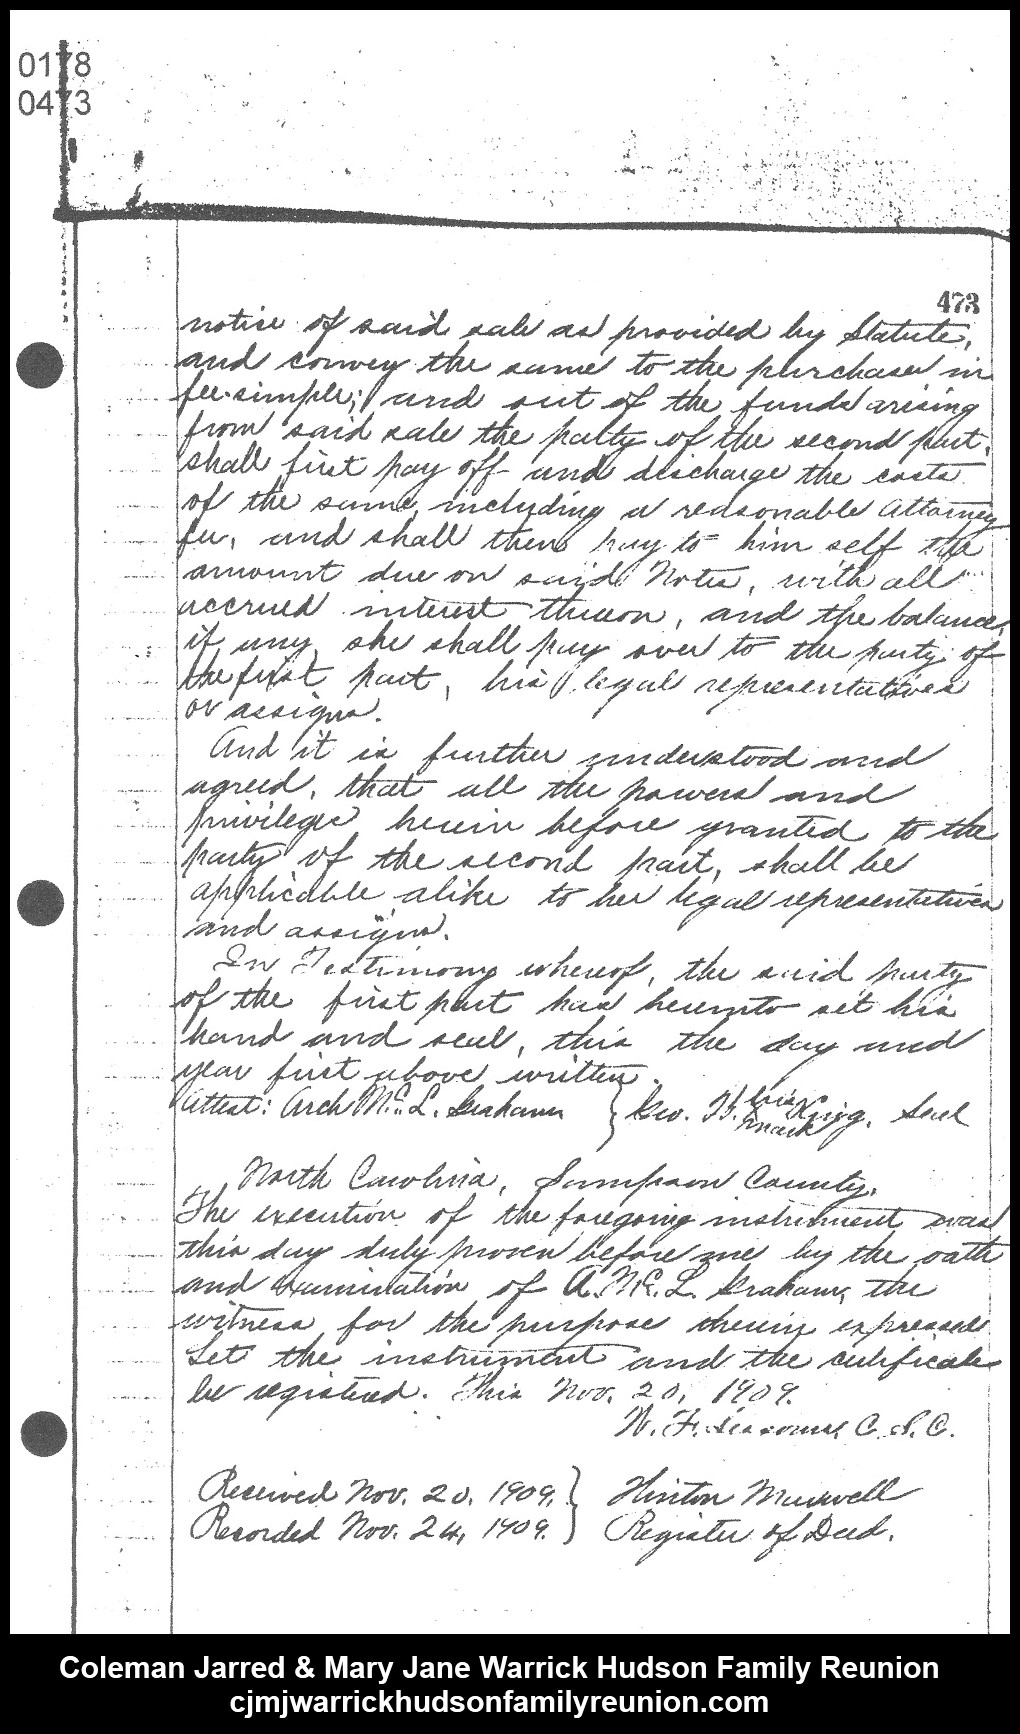 1909, 11-24 - Deed - George W. King to MJ (page 3 of 3)